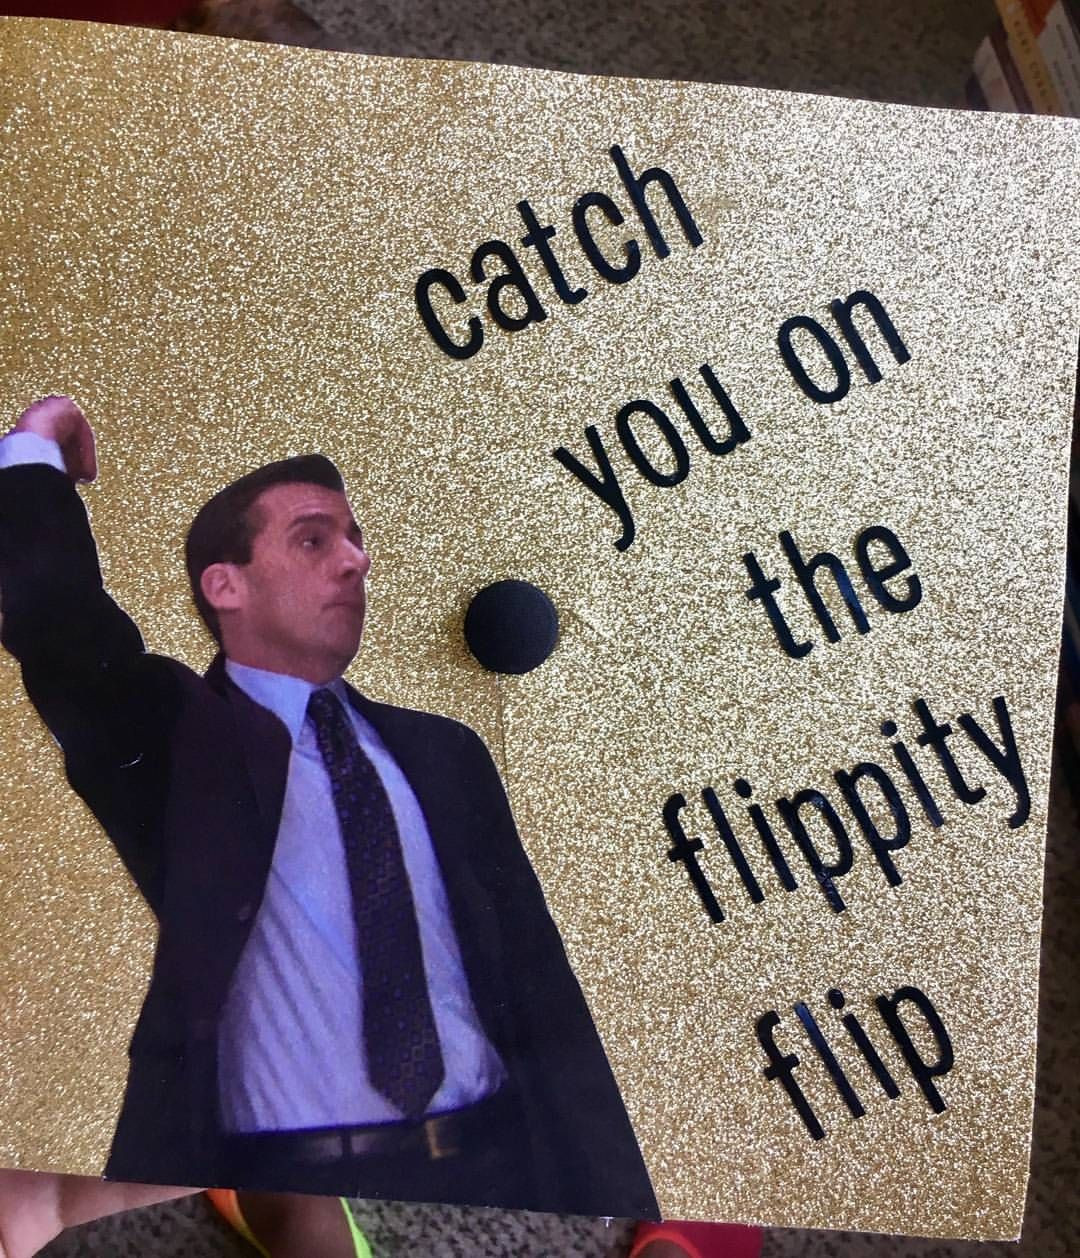 The Office Graduation Quotes
 “May your hats fly as high as your dreams” the office